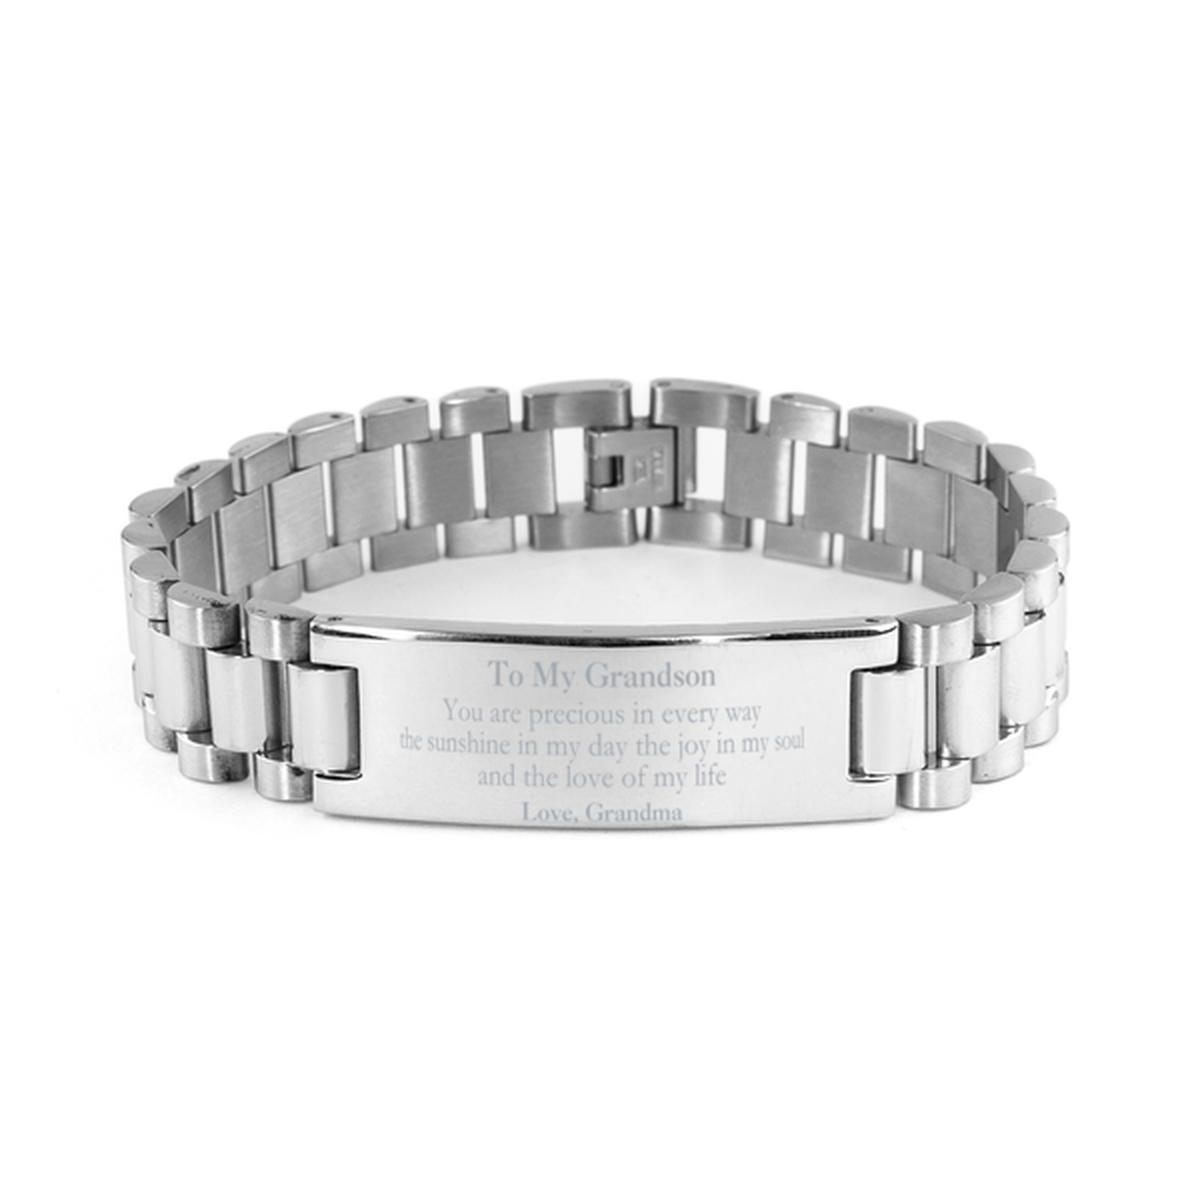 Graduation Gifts for Grandson Ladder Stainless Steel Bracelet Present from Grandma, Christmas Grandson Birthday Gifts Grandson You are precious in every way the sunshine in my day. Love, Grandma